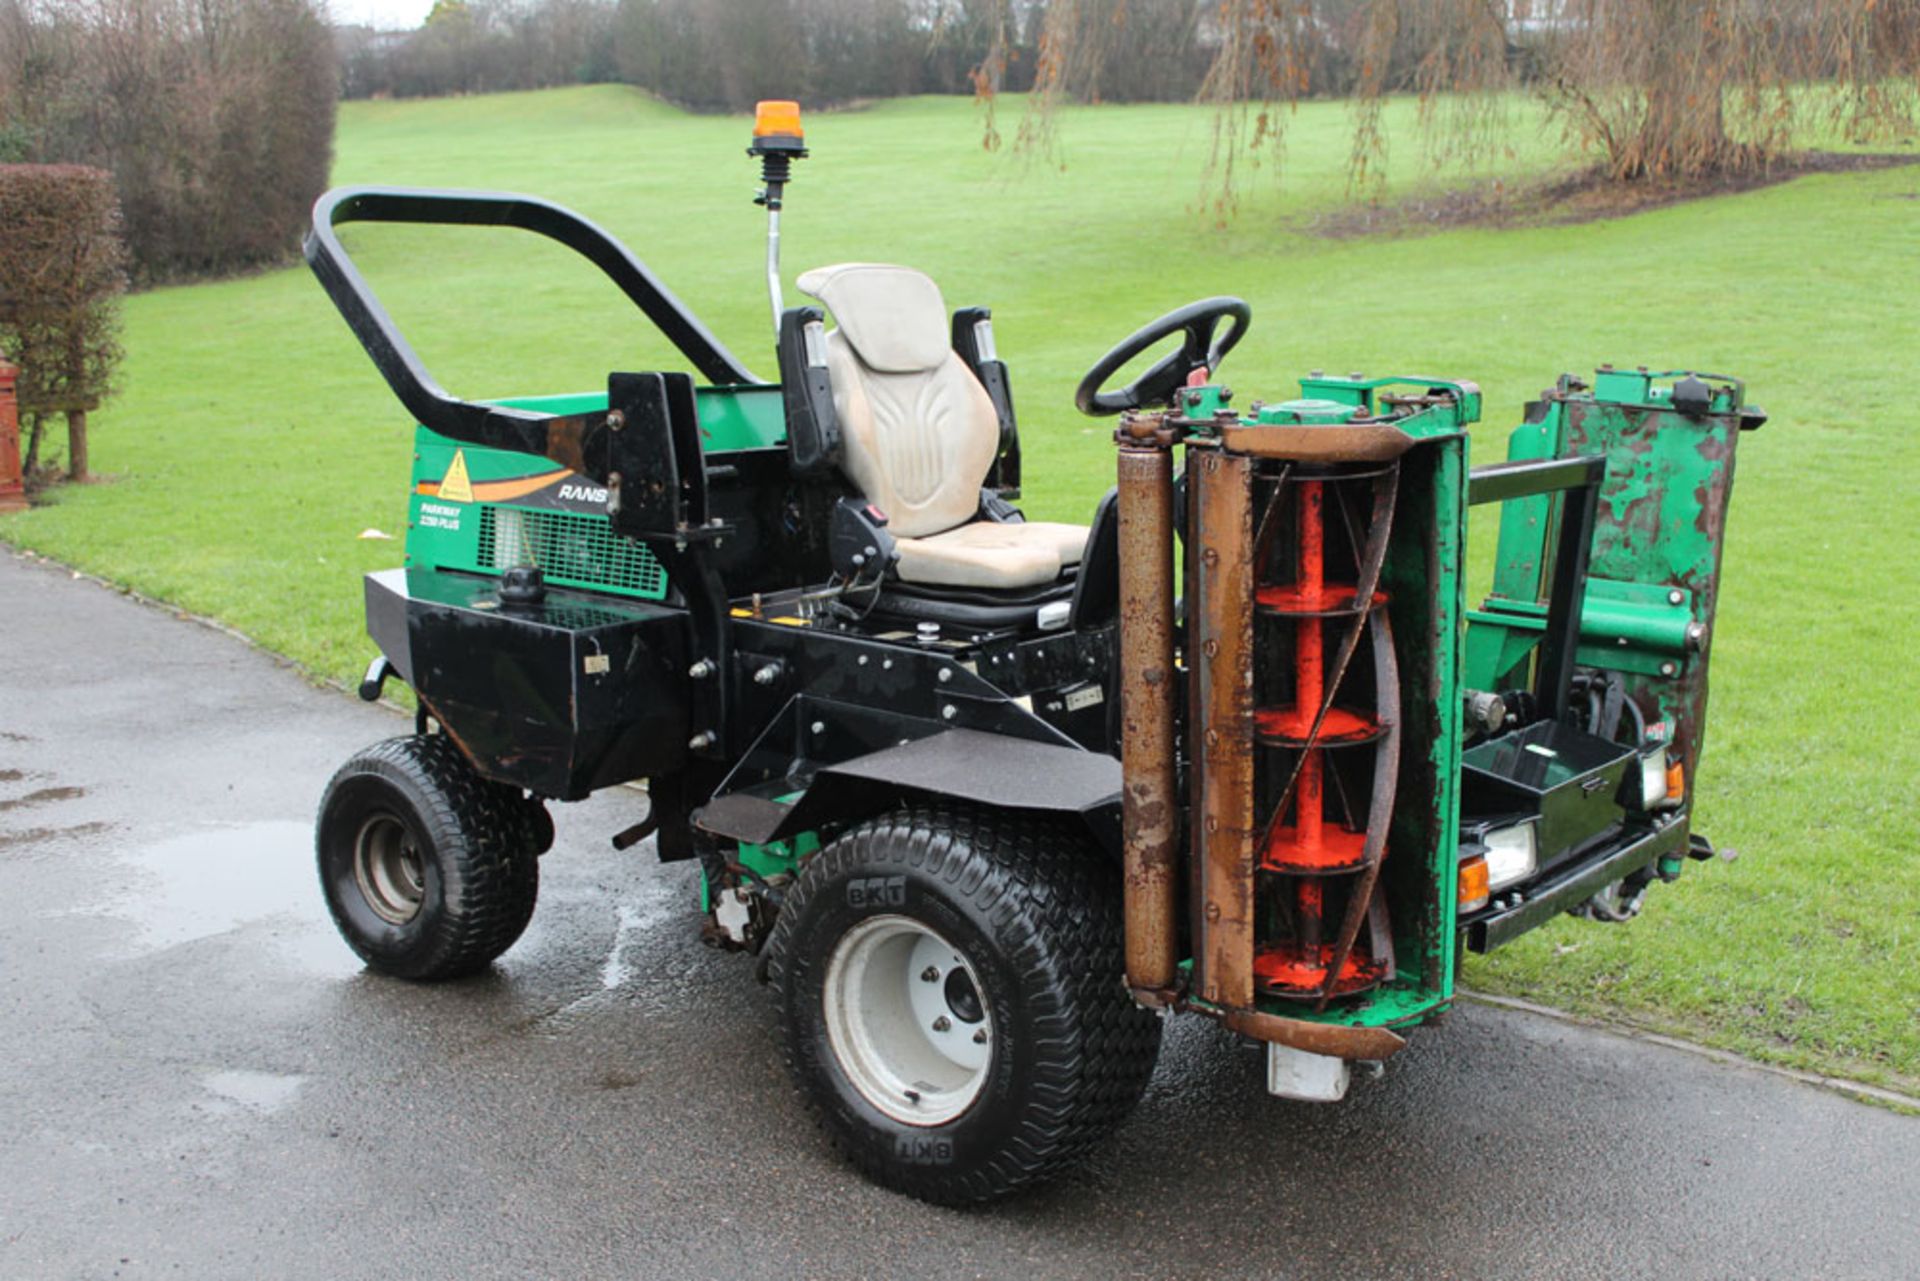 2010 Ransomes Parkway 2250 Plus Ride On Cylinder Mower - Image 2 of 8